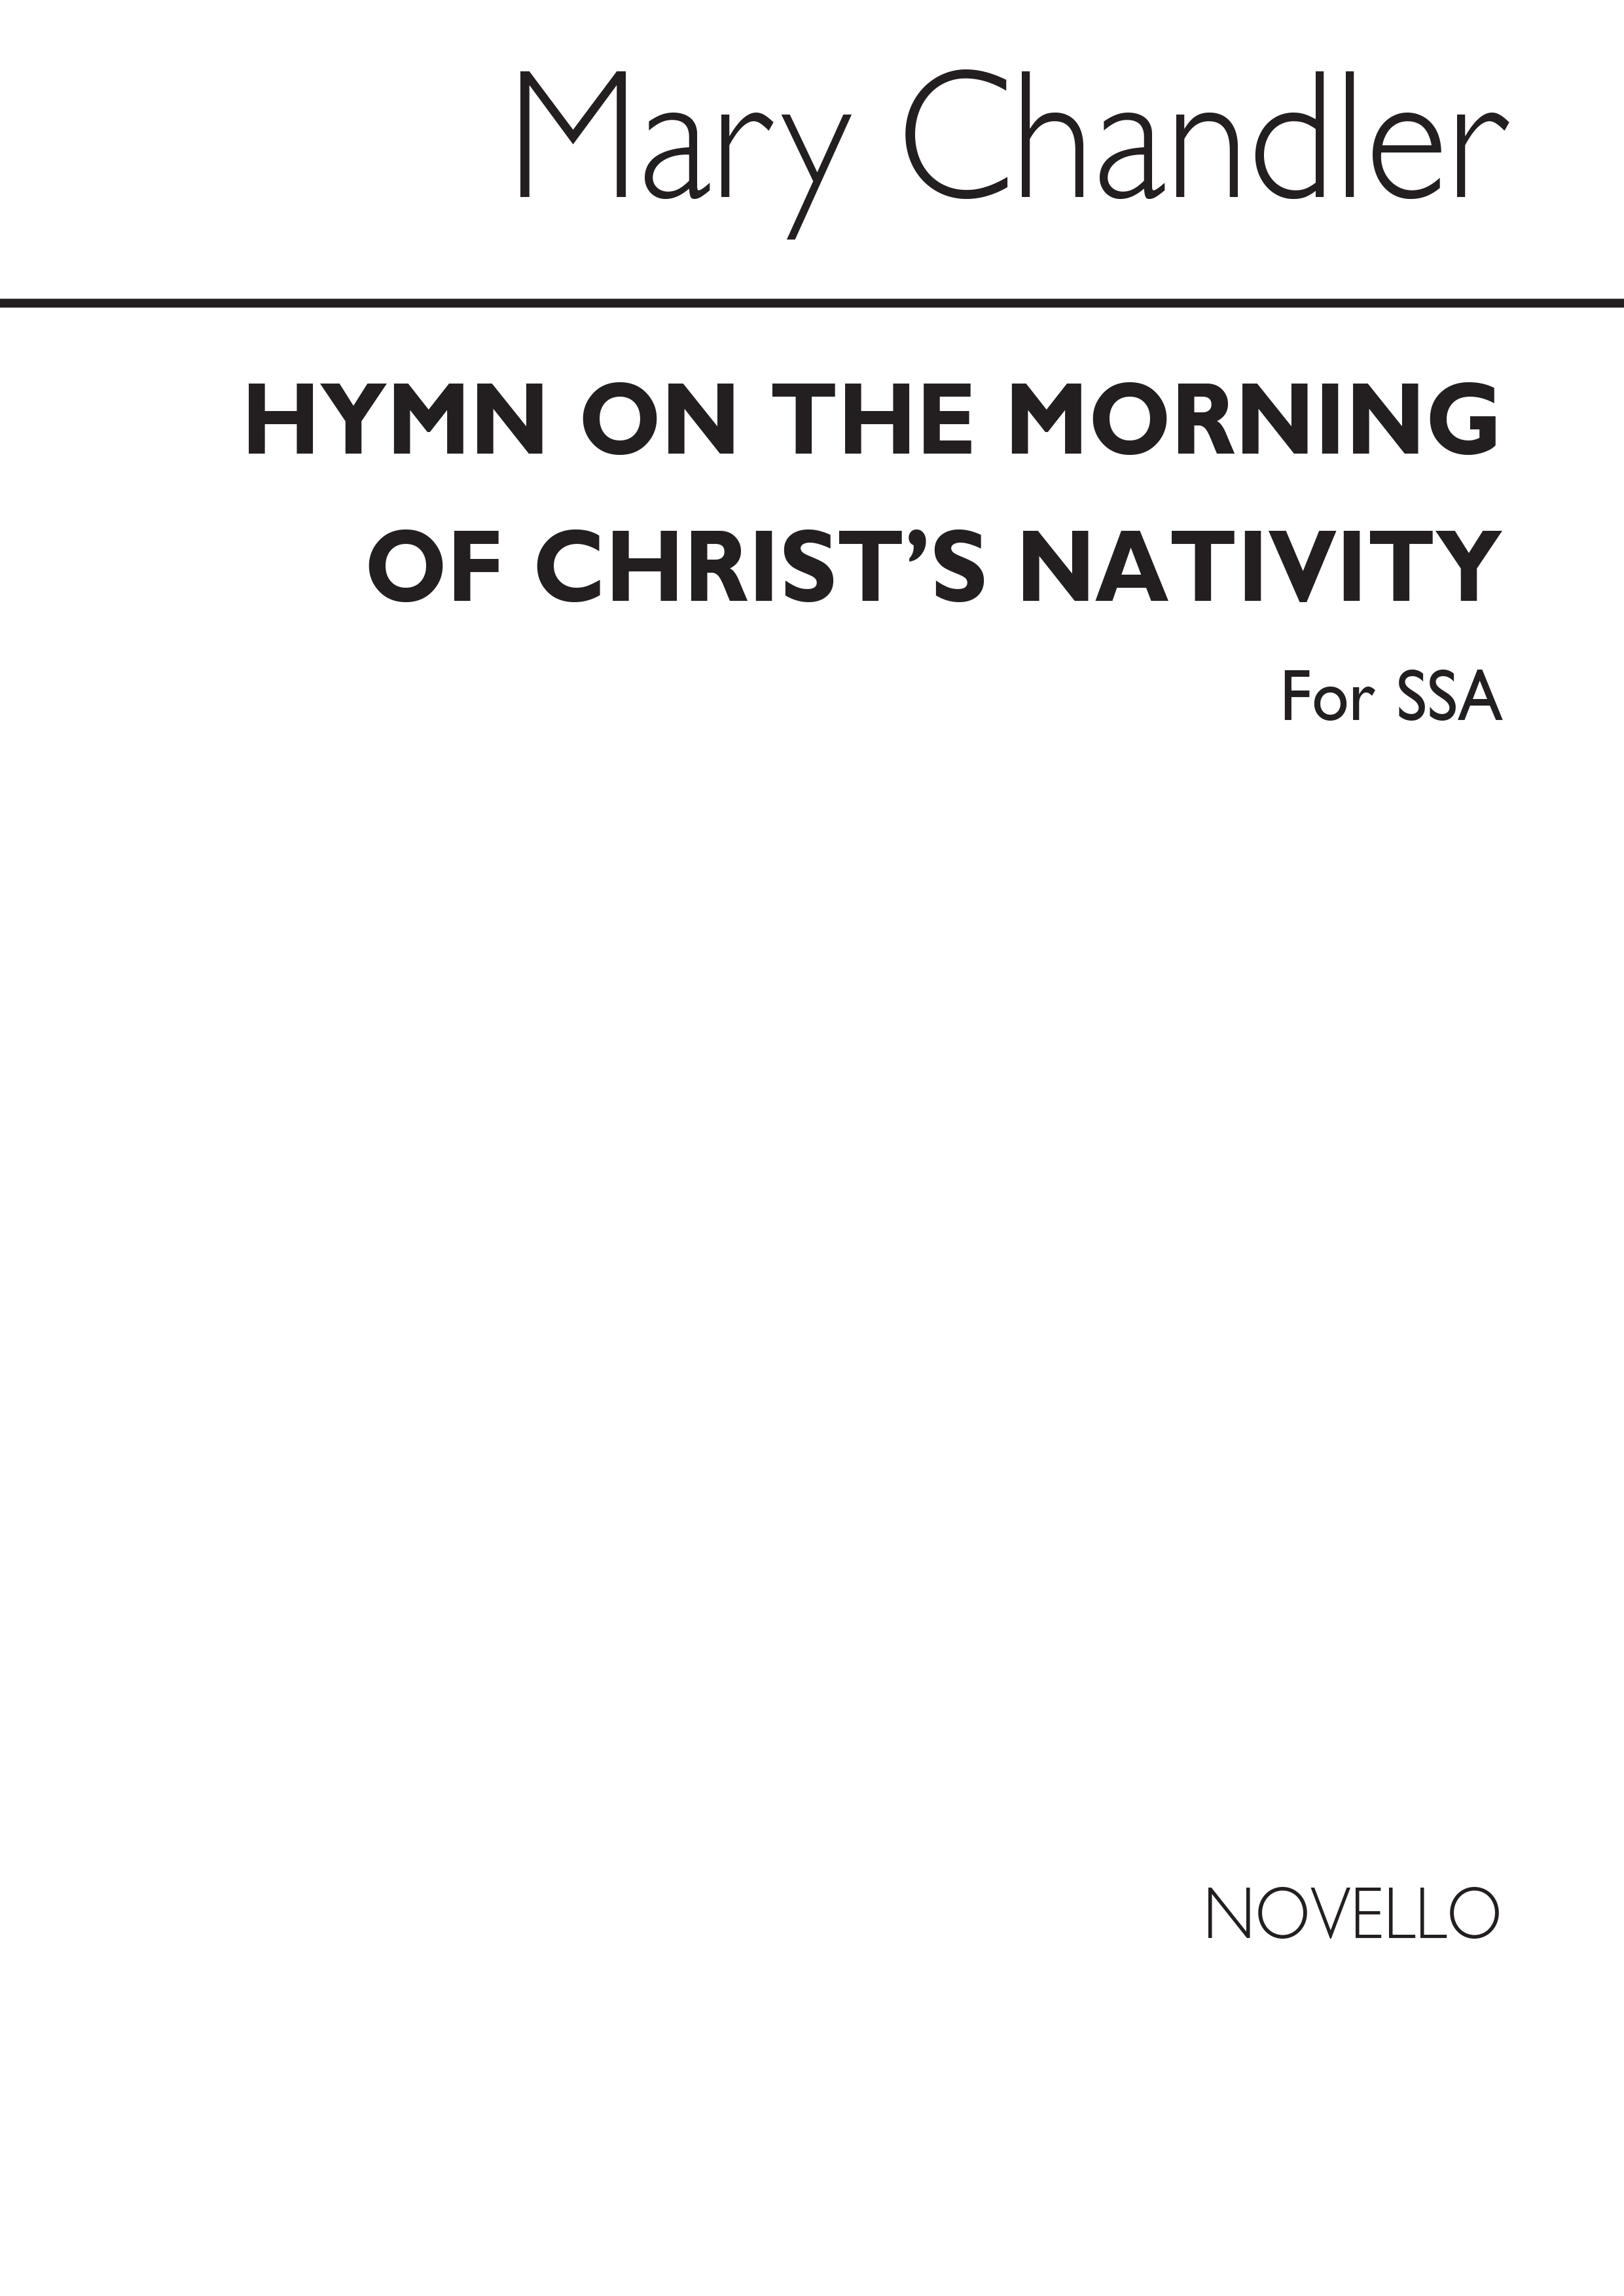 Mary Chandler: Hymn On The Morning Of Christ's Nativity